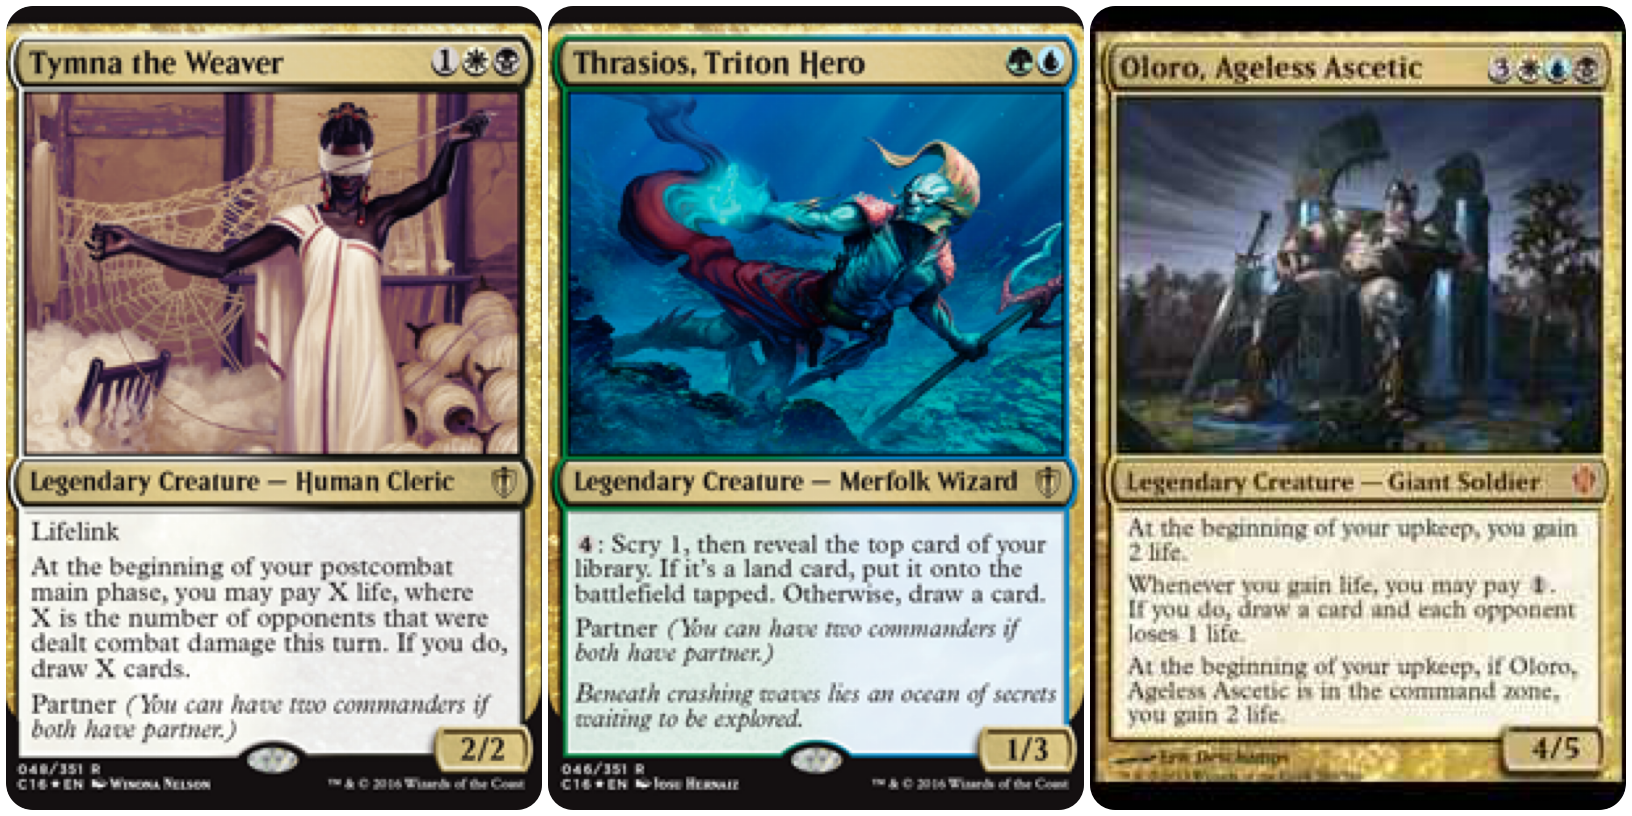 Tymna the Weaver & Thrasios, Triton Hero - I’m not overly sold on these...